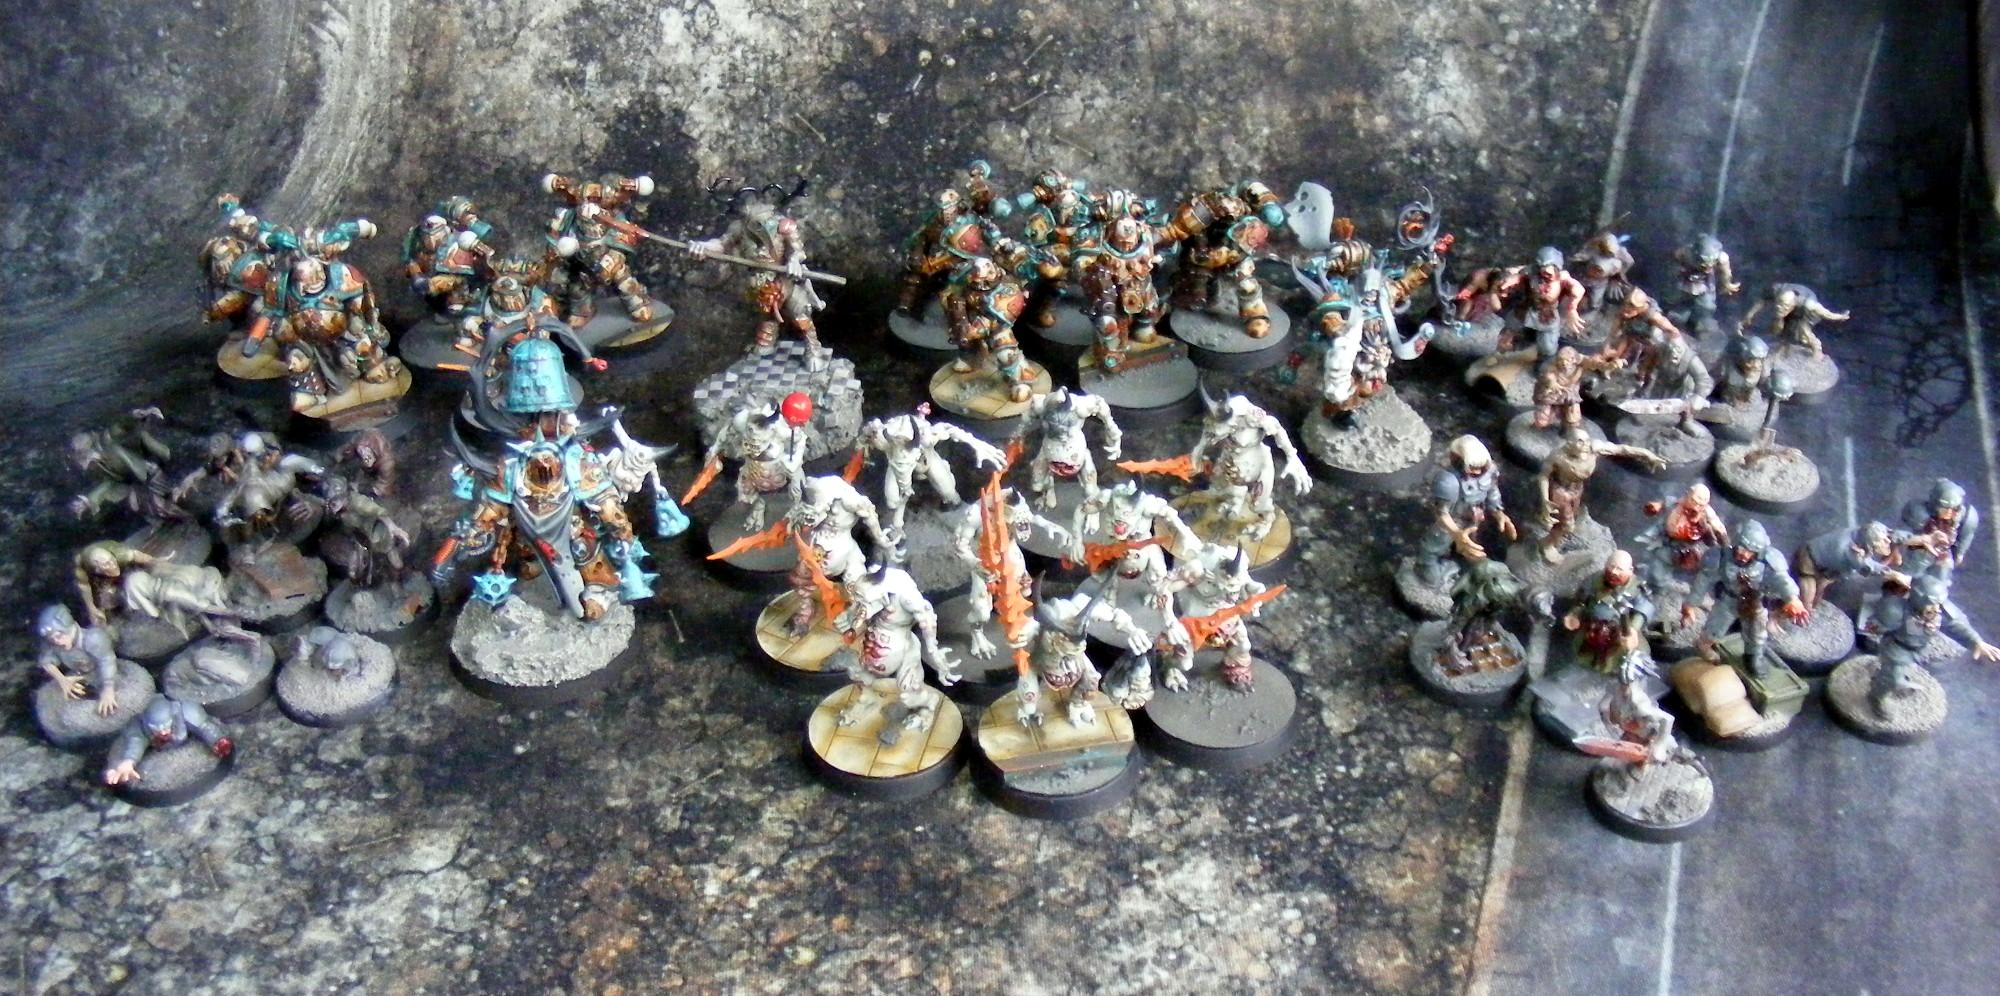 Apostles Of Contagion, Army, Daemons, Death Guard, Nurgle, Plague Brearers, Plague Marines, Plague Zombies, Pox Walkers, Warhammer 40,000